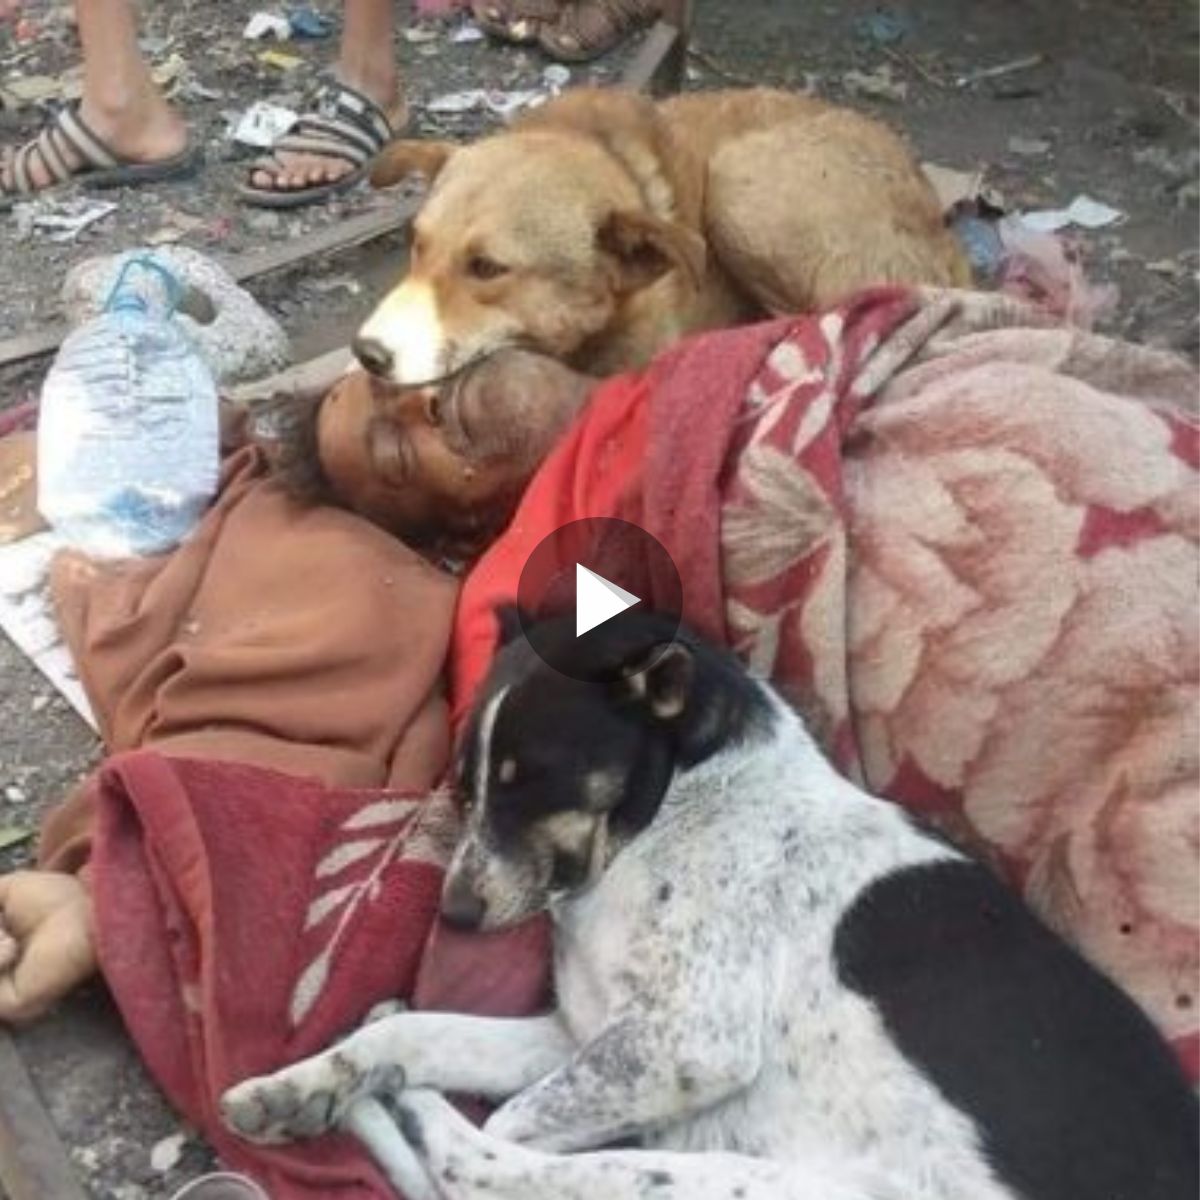 Even though the man unfortunately passed away, his loyal pet dogs remained by his side.